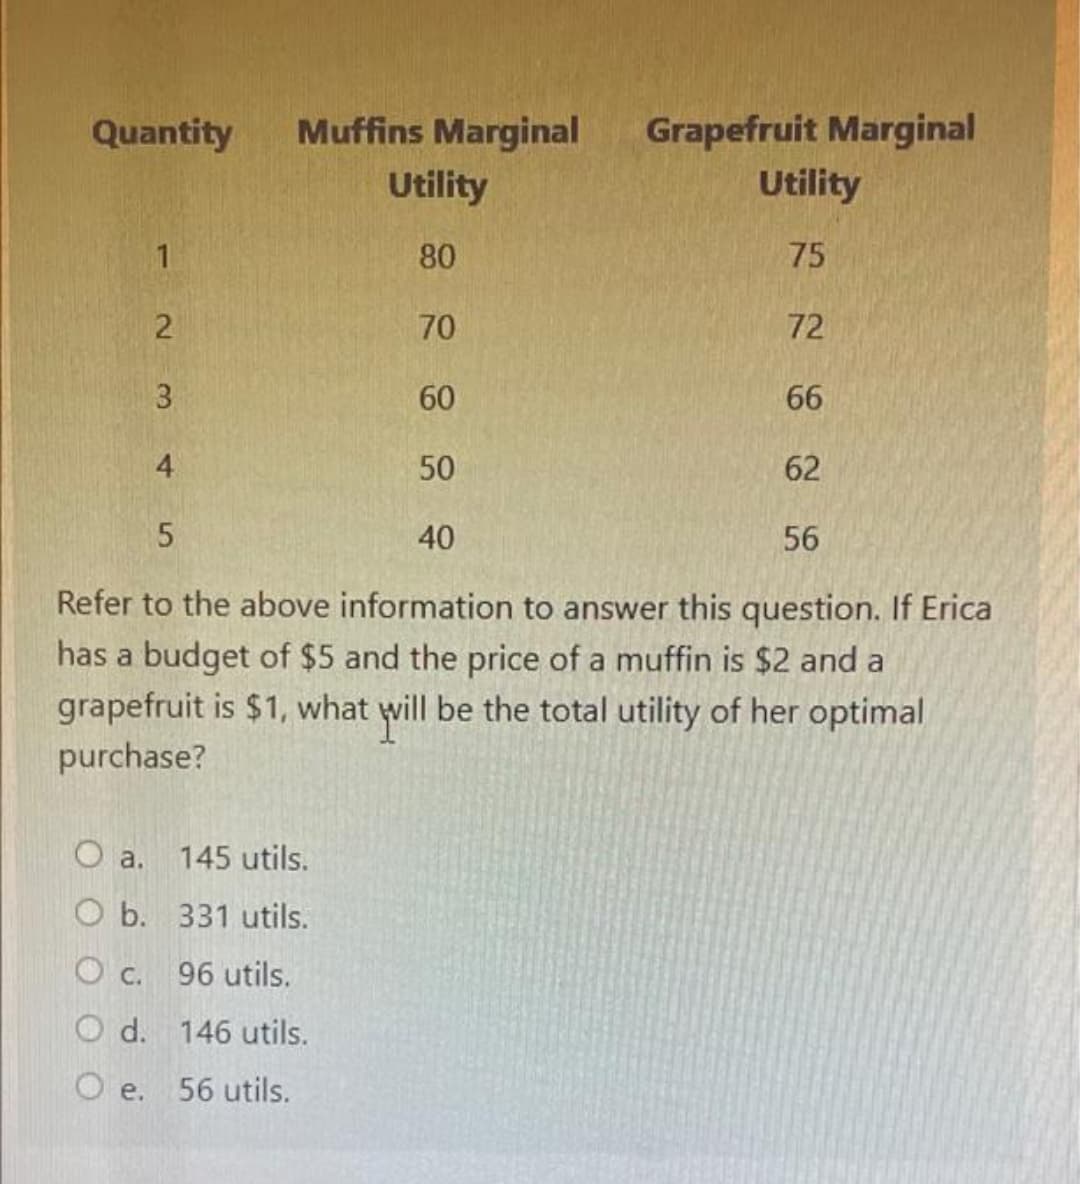 Quantity
1
2
3
4
Muffins Marginal
Utility
80
70
O a.
145 utils.
O b.
331 utils.
O c.
96 utils.
O d. 146 utils.
O e. 56 utils.
60
50
Grapefruit Marginal
Utility
75
72
66
62
5
40
56
Refer to the above information to answer this question. If Erica
has a budget of $5 and the price of a muffin is $2 and a
grapefruit is $1, what will be the total utility of her optimal
purchase?